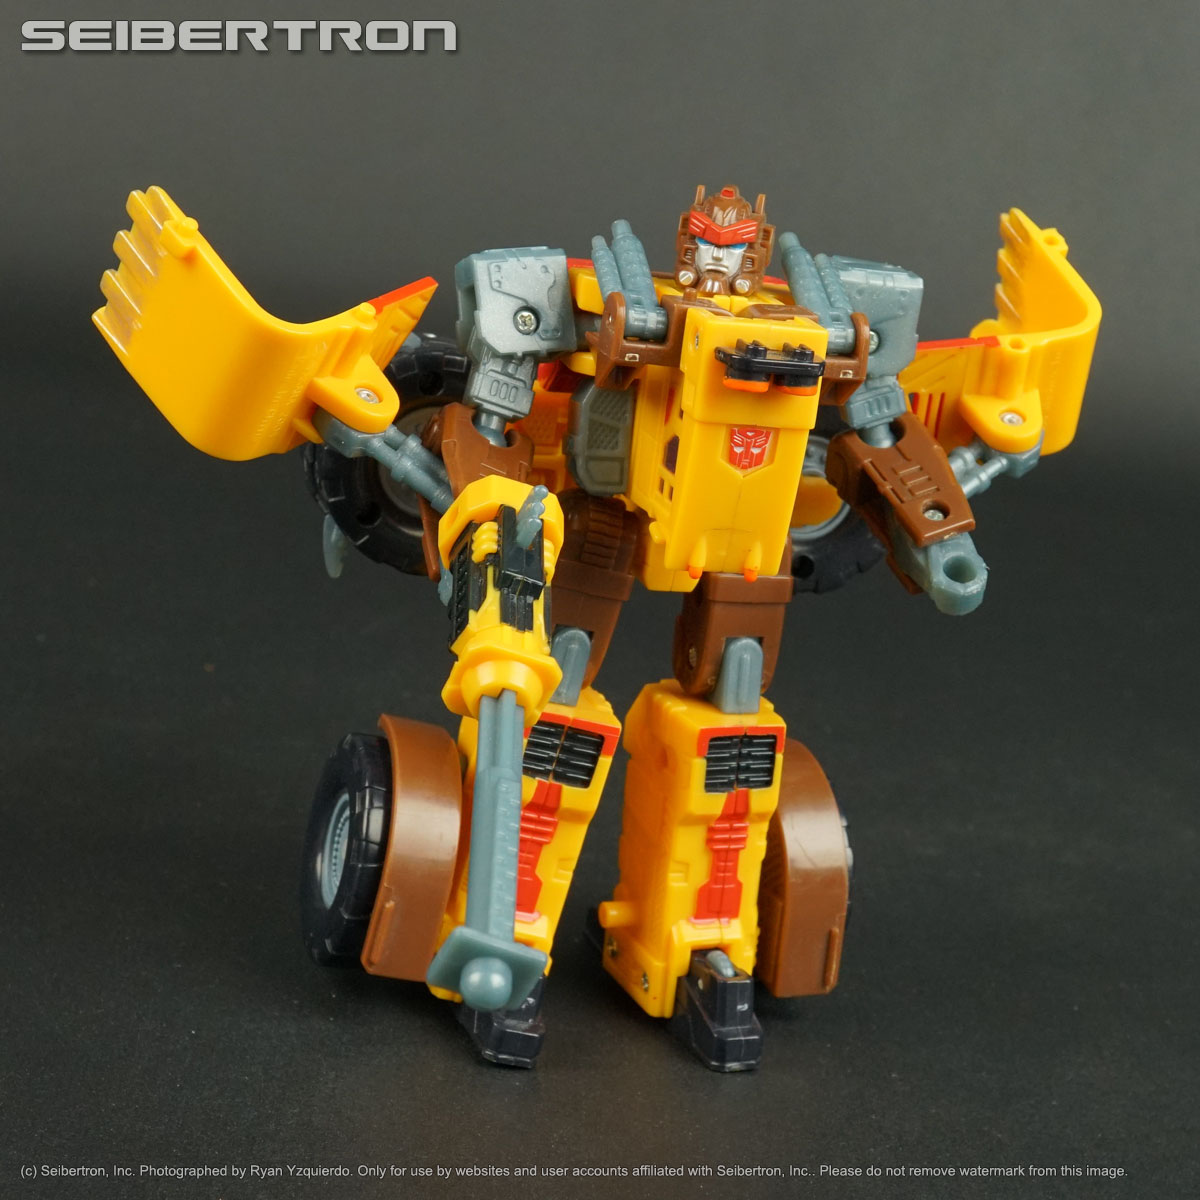 LANDMINE Transformers Cybertron deluxe complete + dr94 key Hasbro 2005 231102A